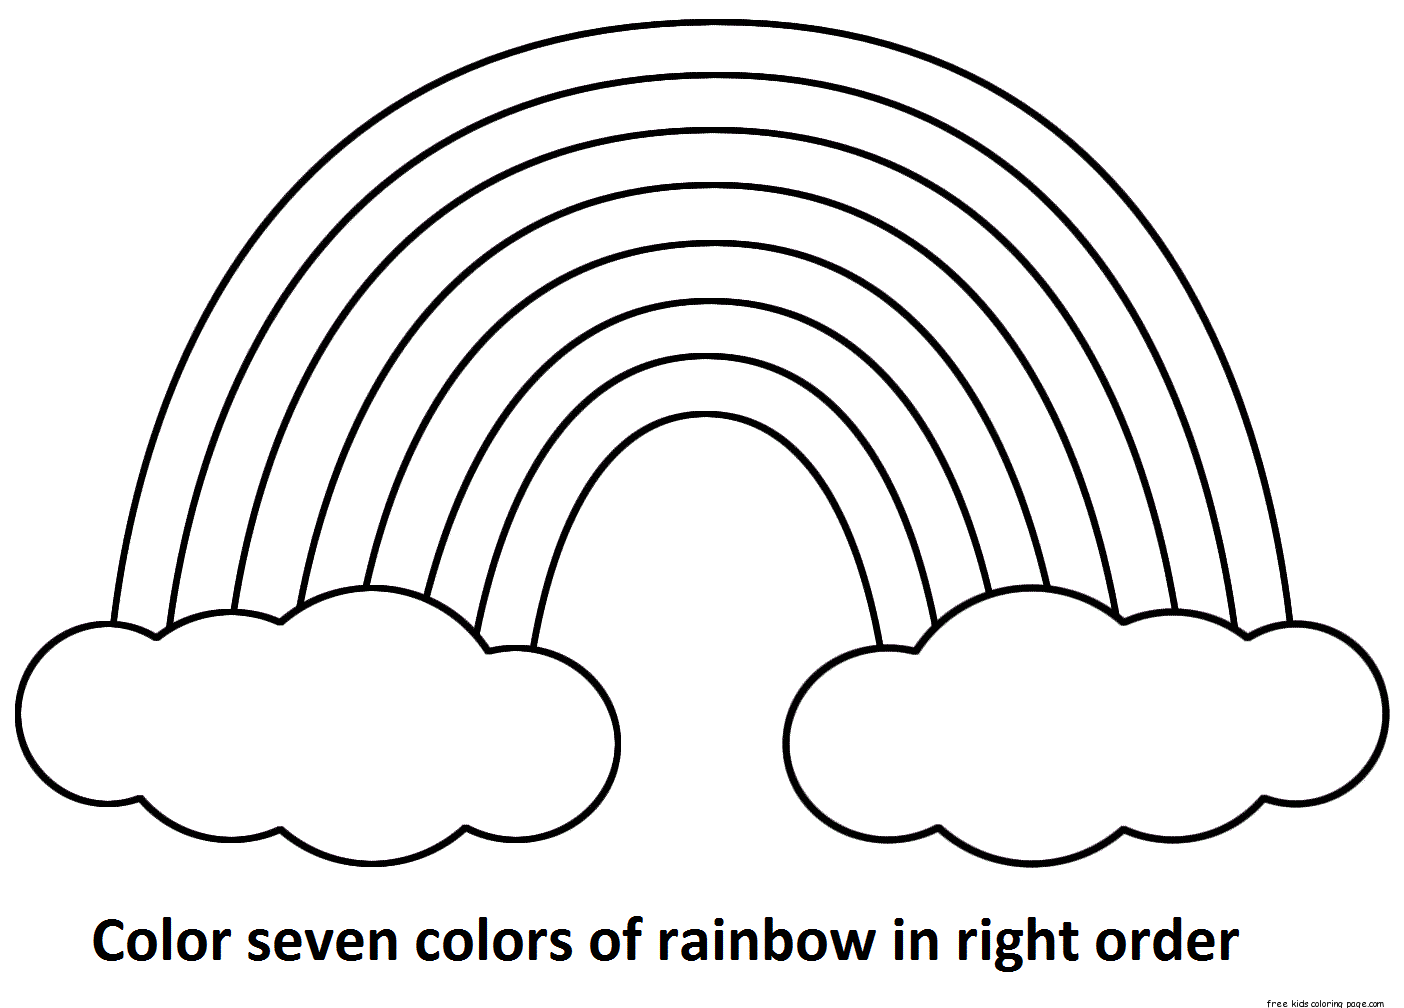 Seven rainbow colors - Free Printable Coloring Pages For Kids.Free